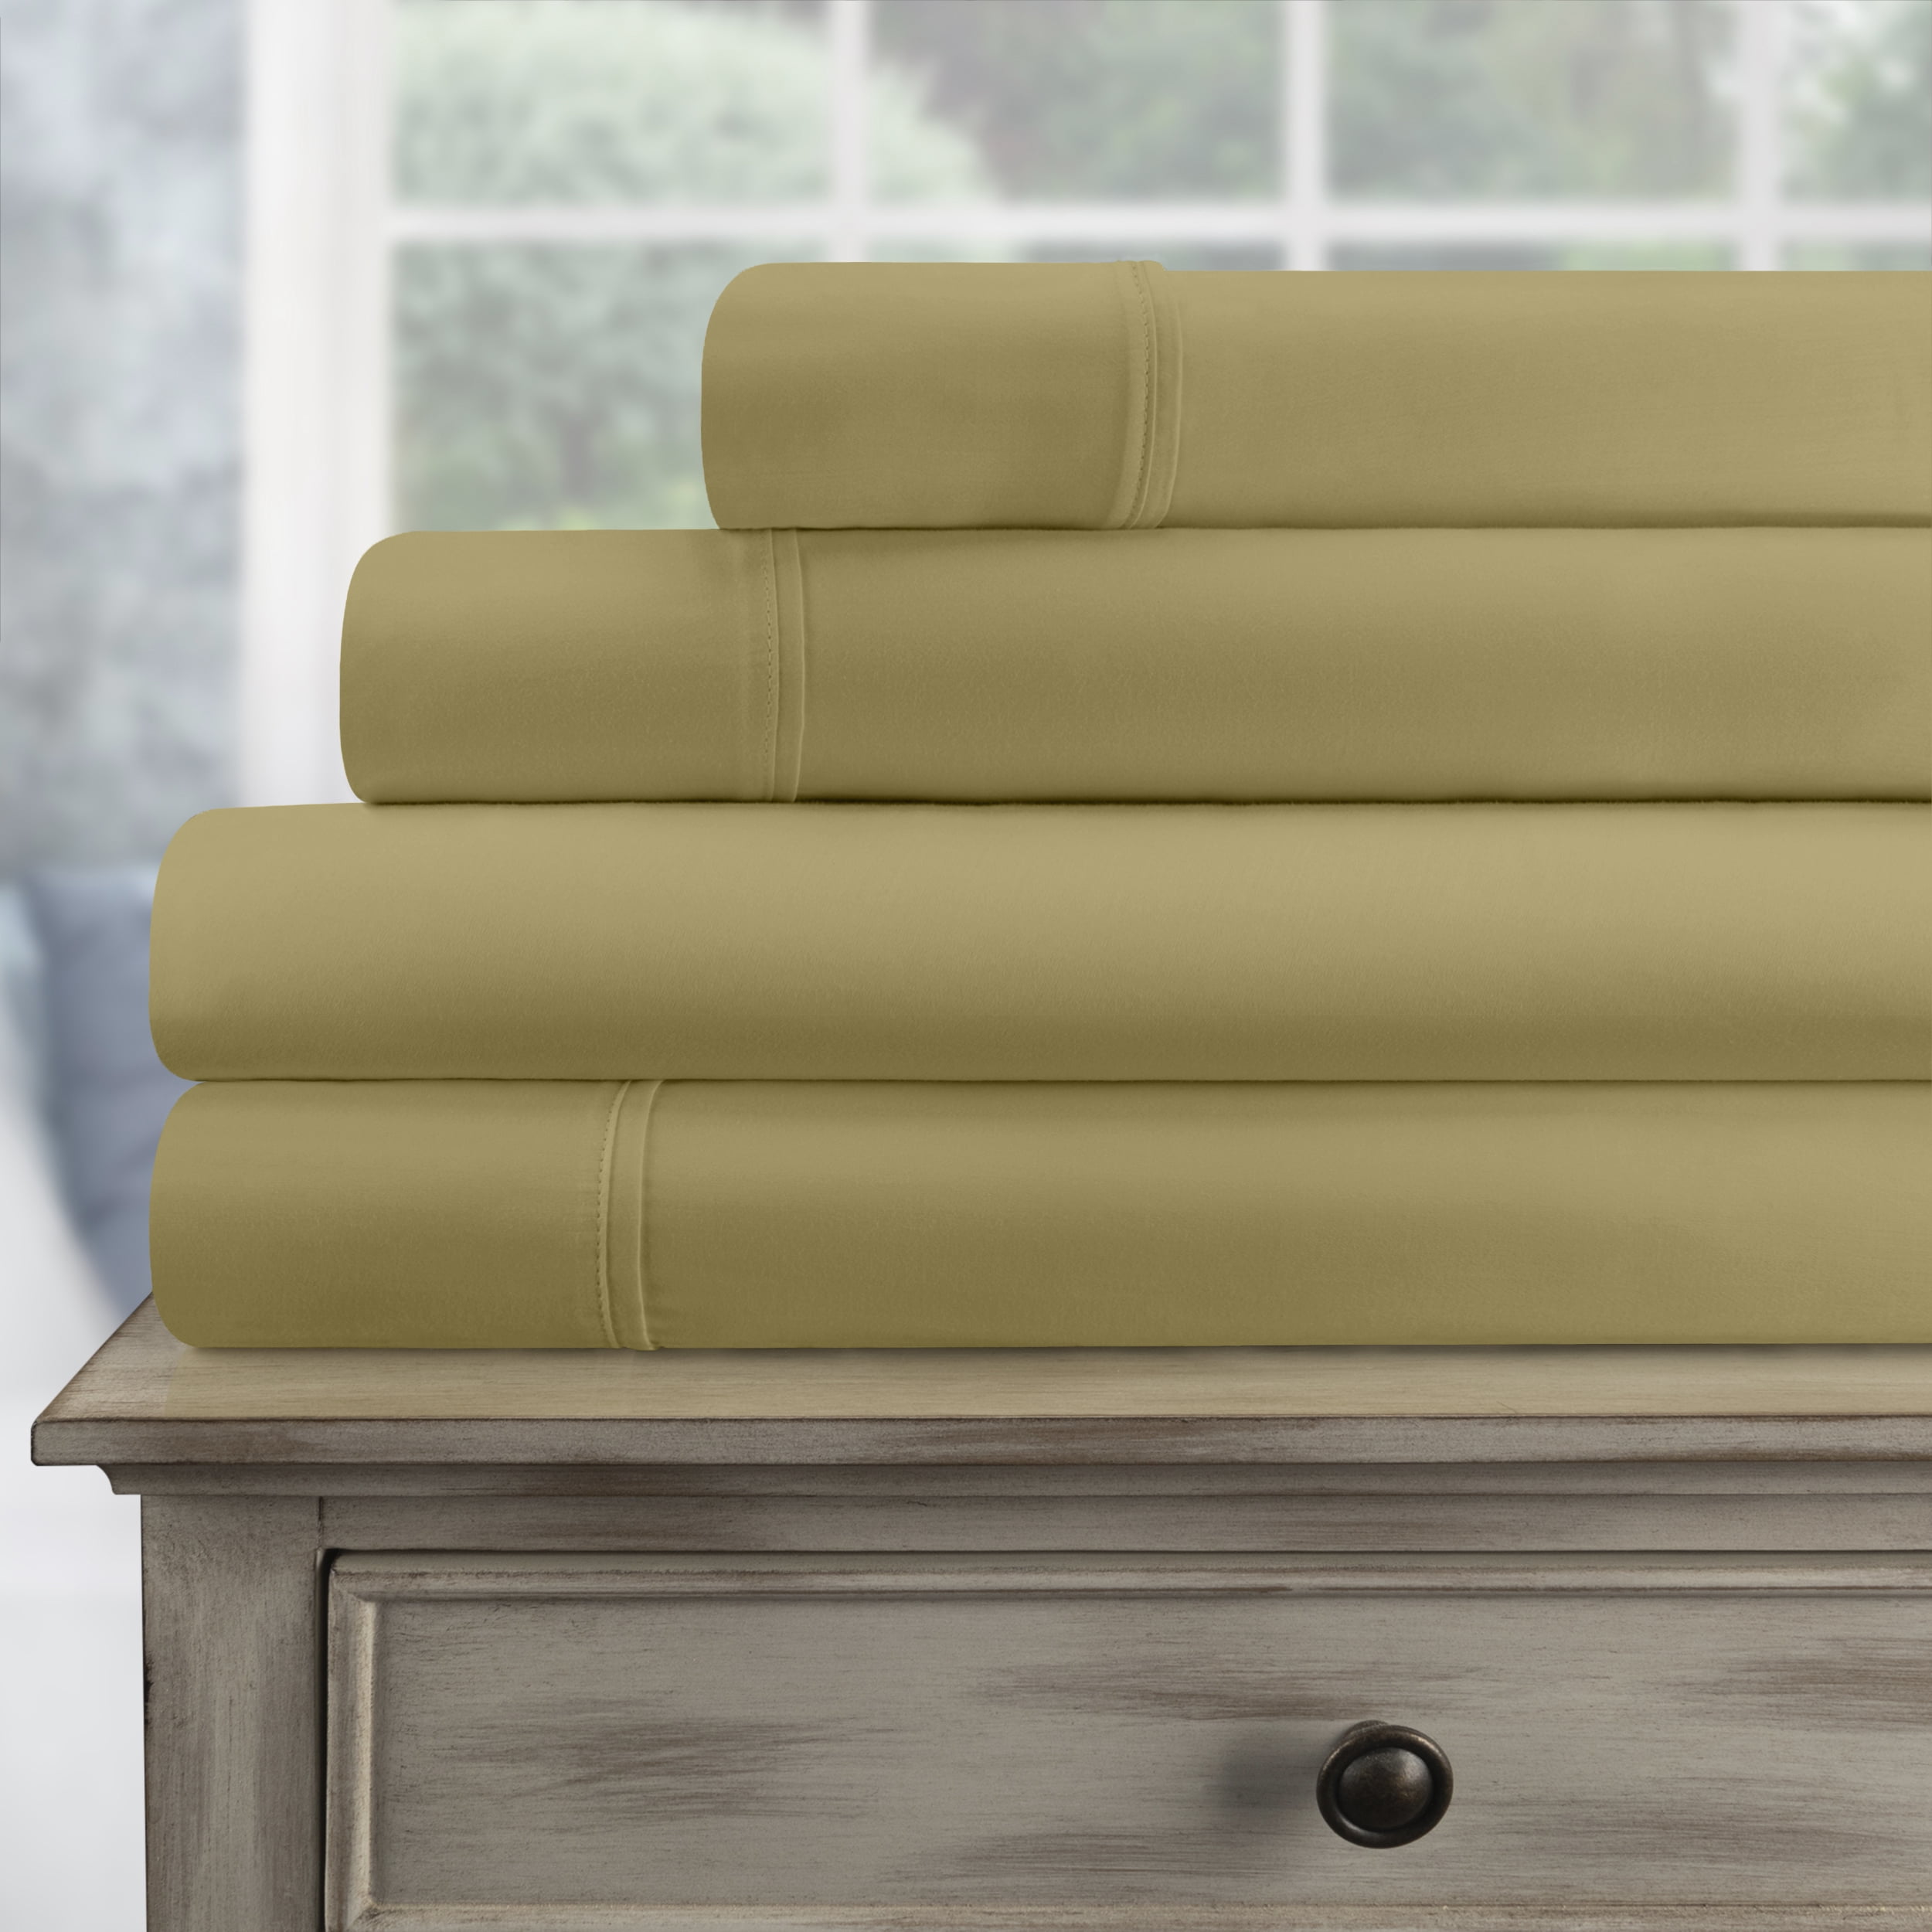 300 Thread Count Egyptian Cotton Solid Sheet Set